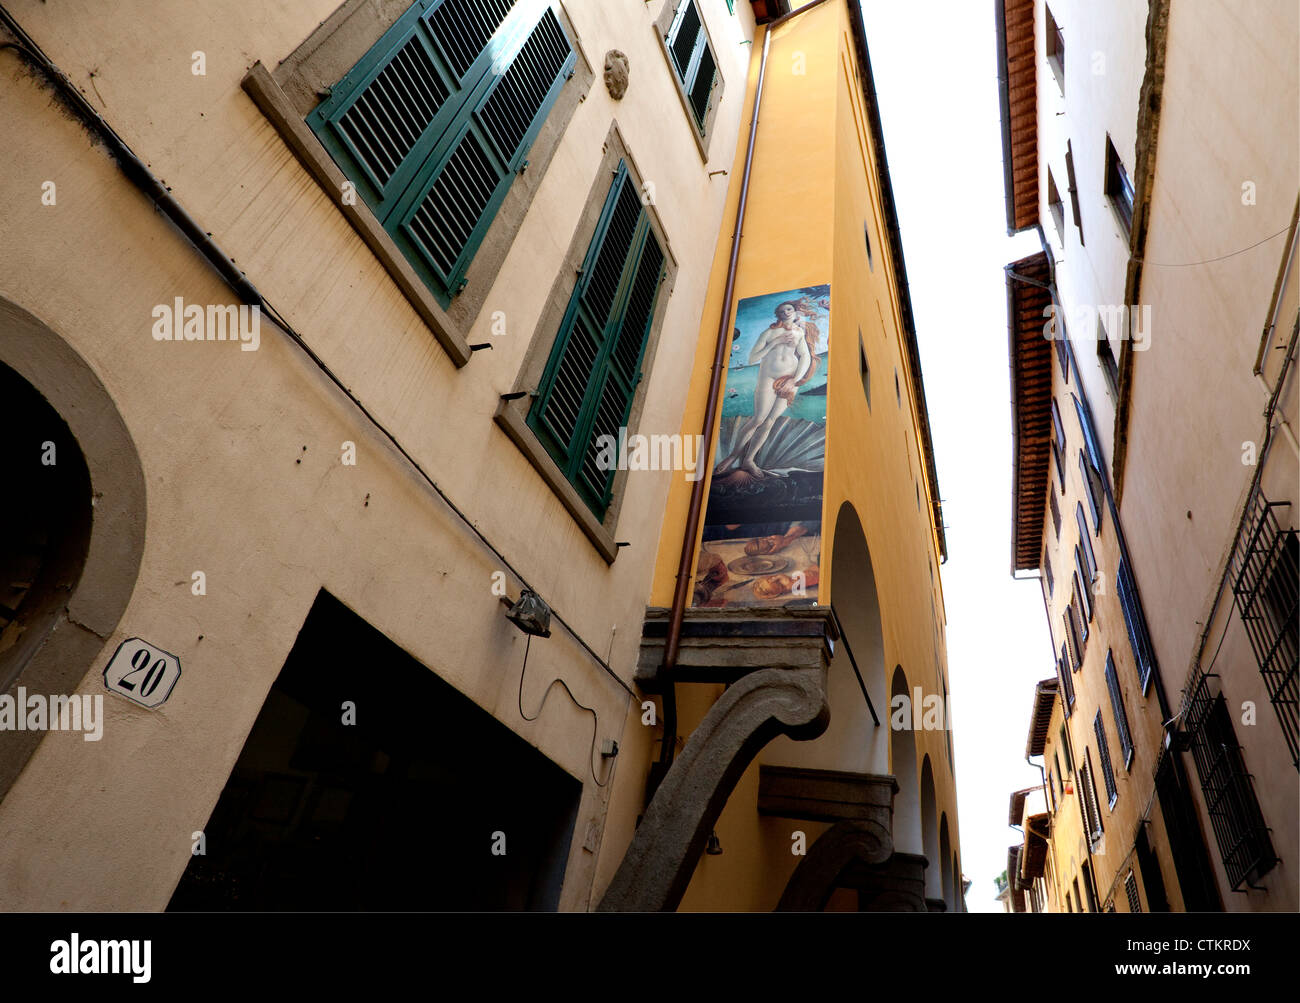 Botticelli's Venus mural in Florence side street, Italy Stock Photo